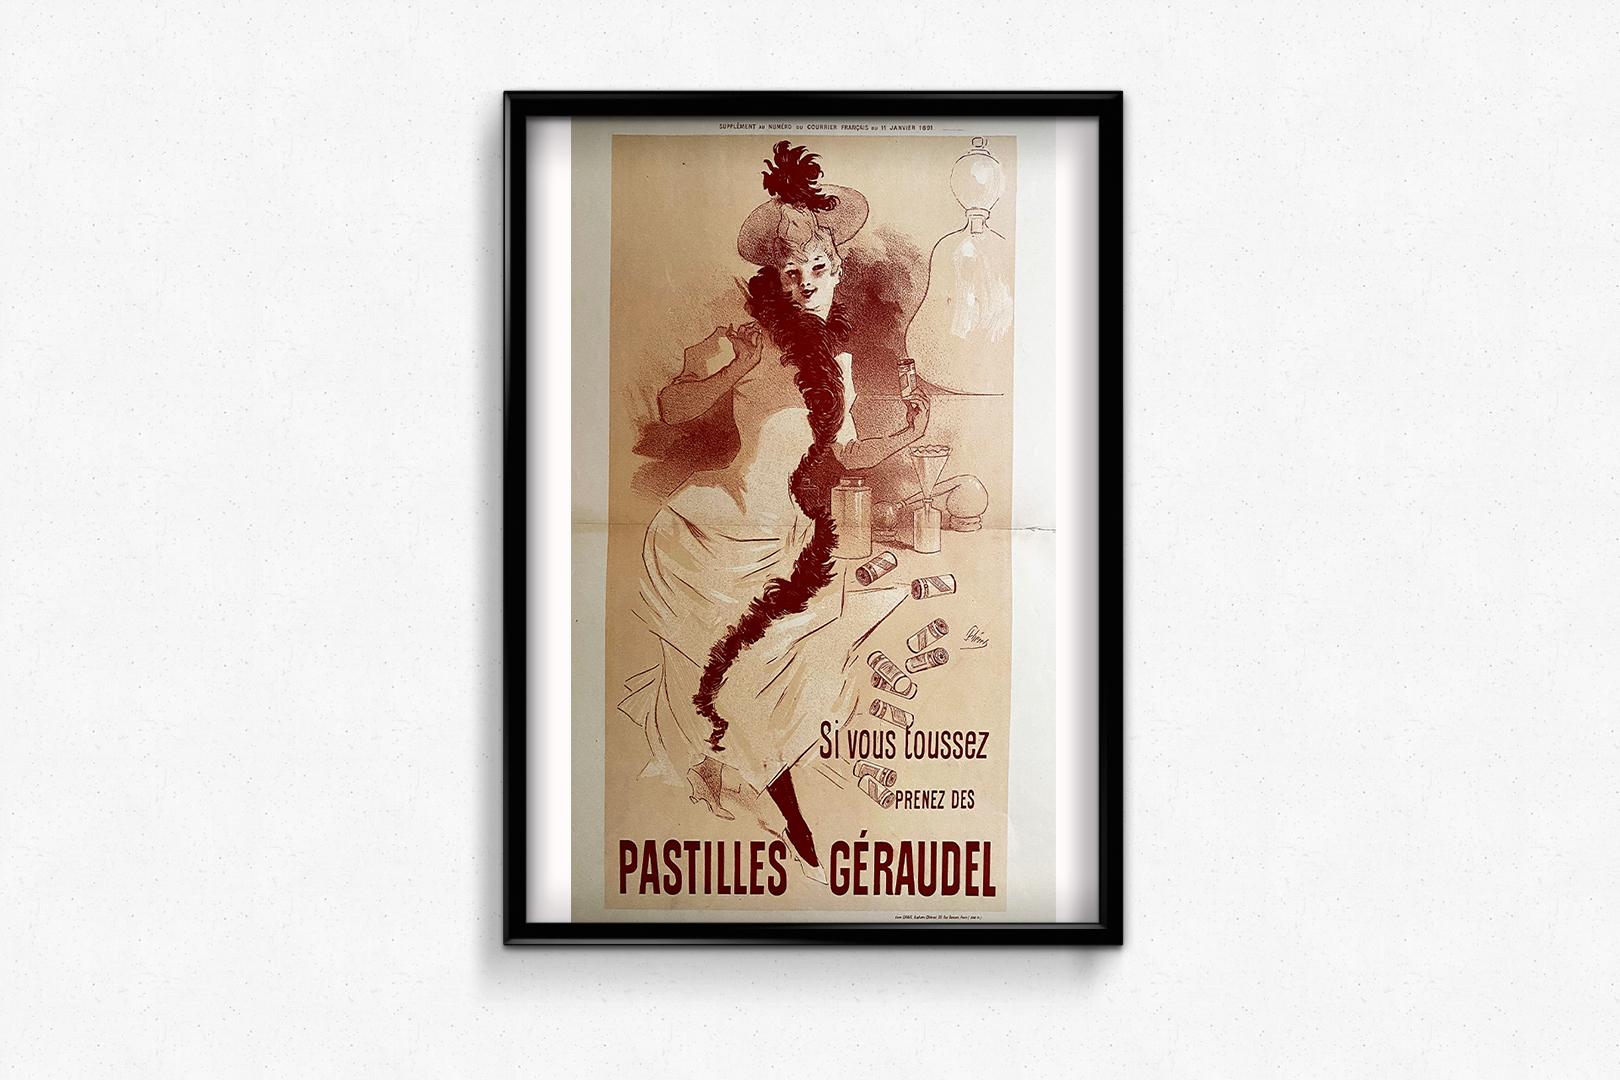 Sublime poster of the period realized in 1891 by Jules Chéret 🇫🇷 (1836-1932) to promote the pastilles for the throat of the brand Géraudel.

Jules Chéret, to whom the title of 